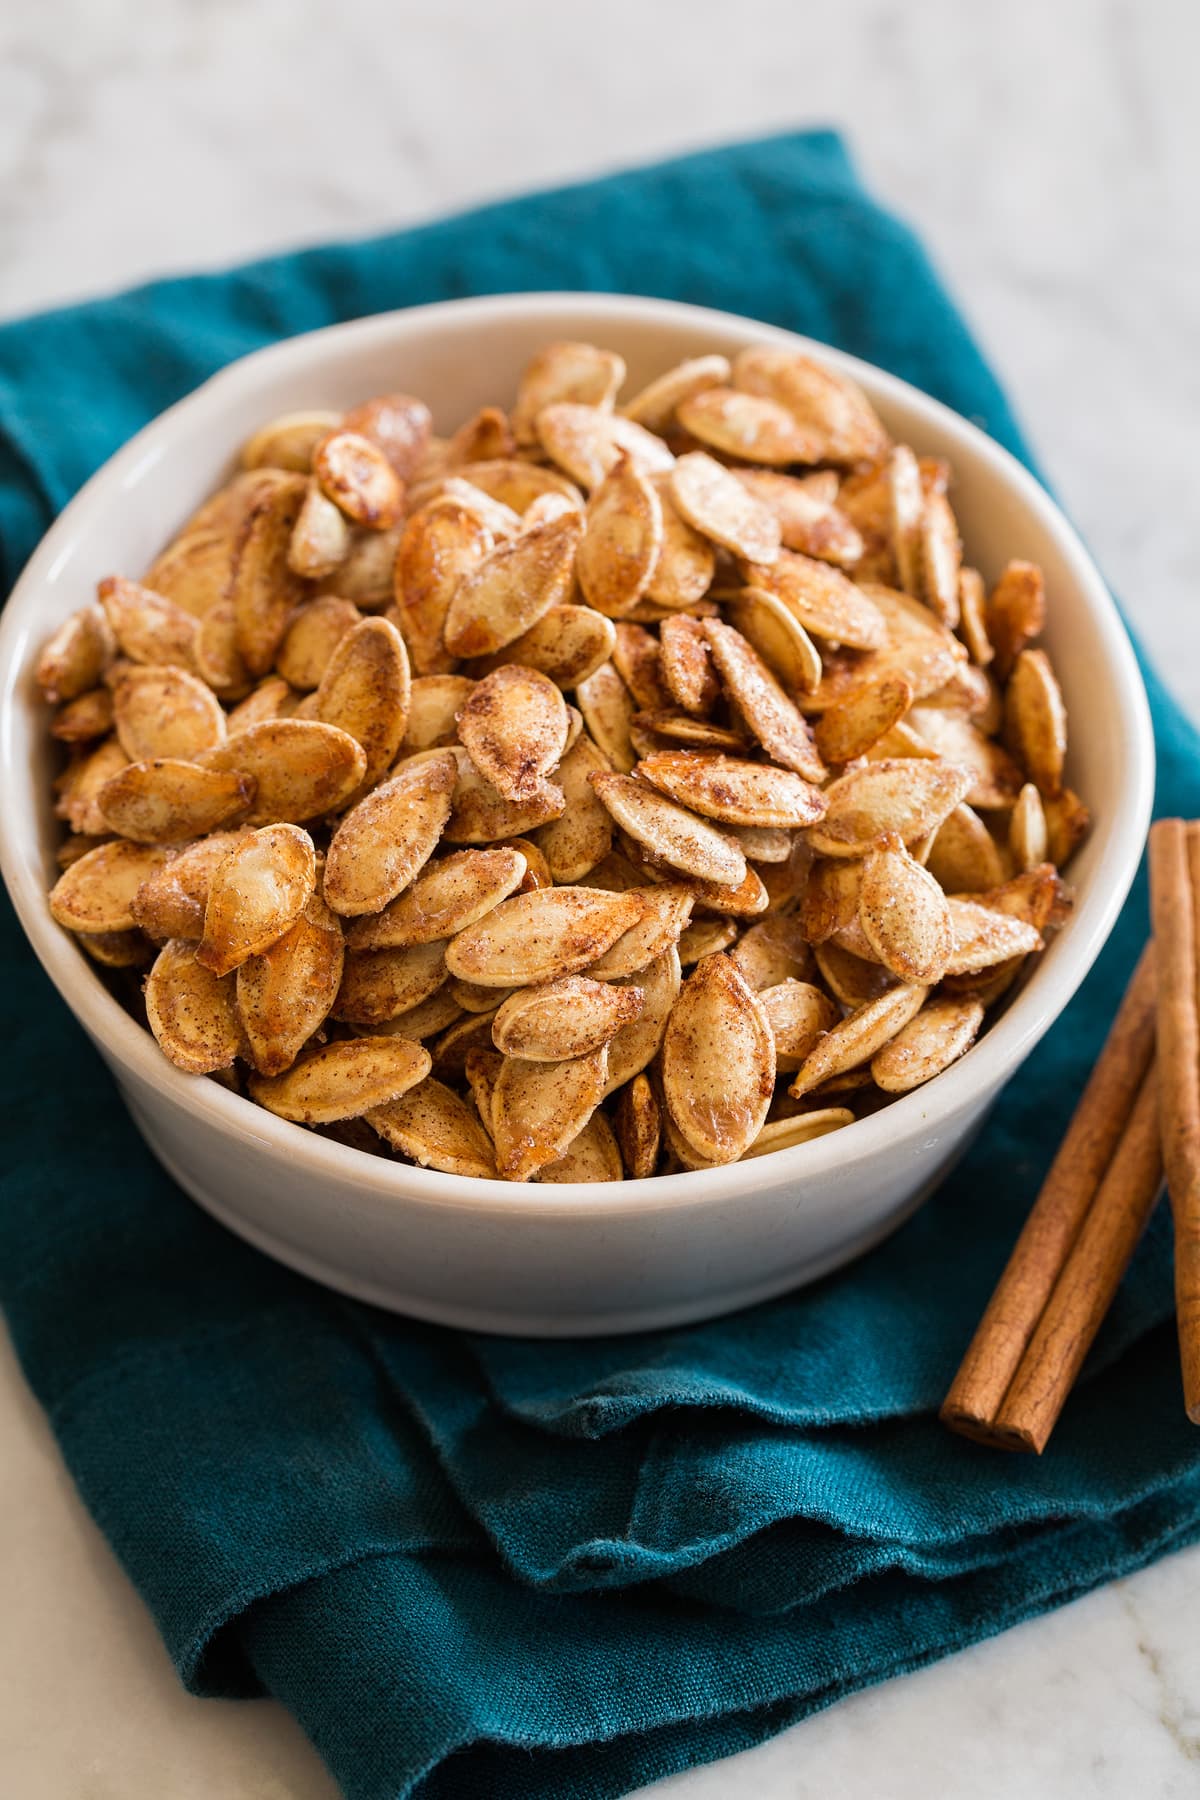 Image of cinnamon sugar roasted pumpkin seeds in a white bowl set over a blue cloth with cinnamon sticks shown to the side.